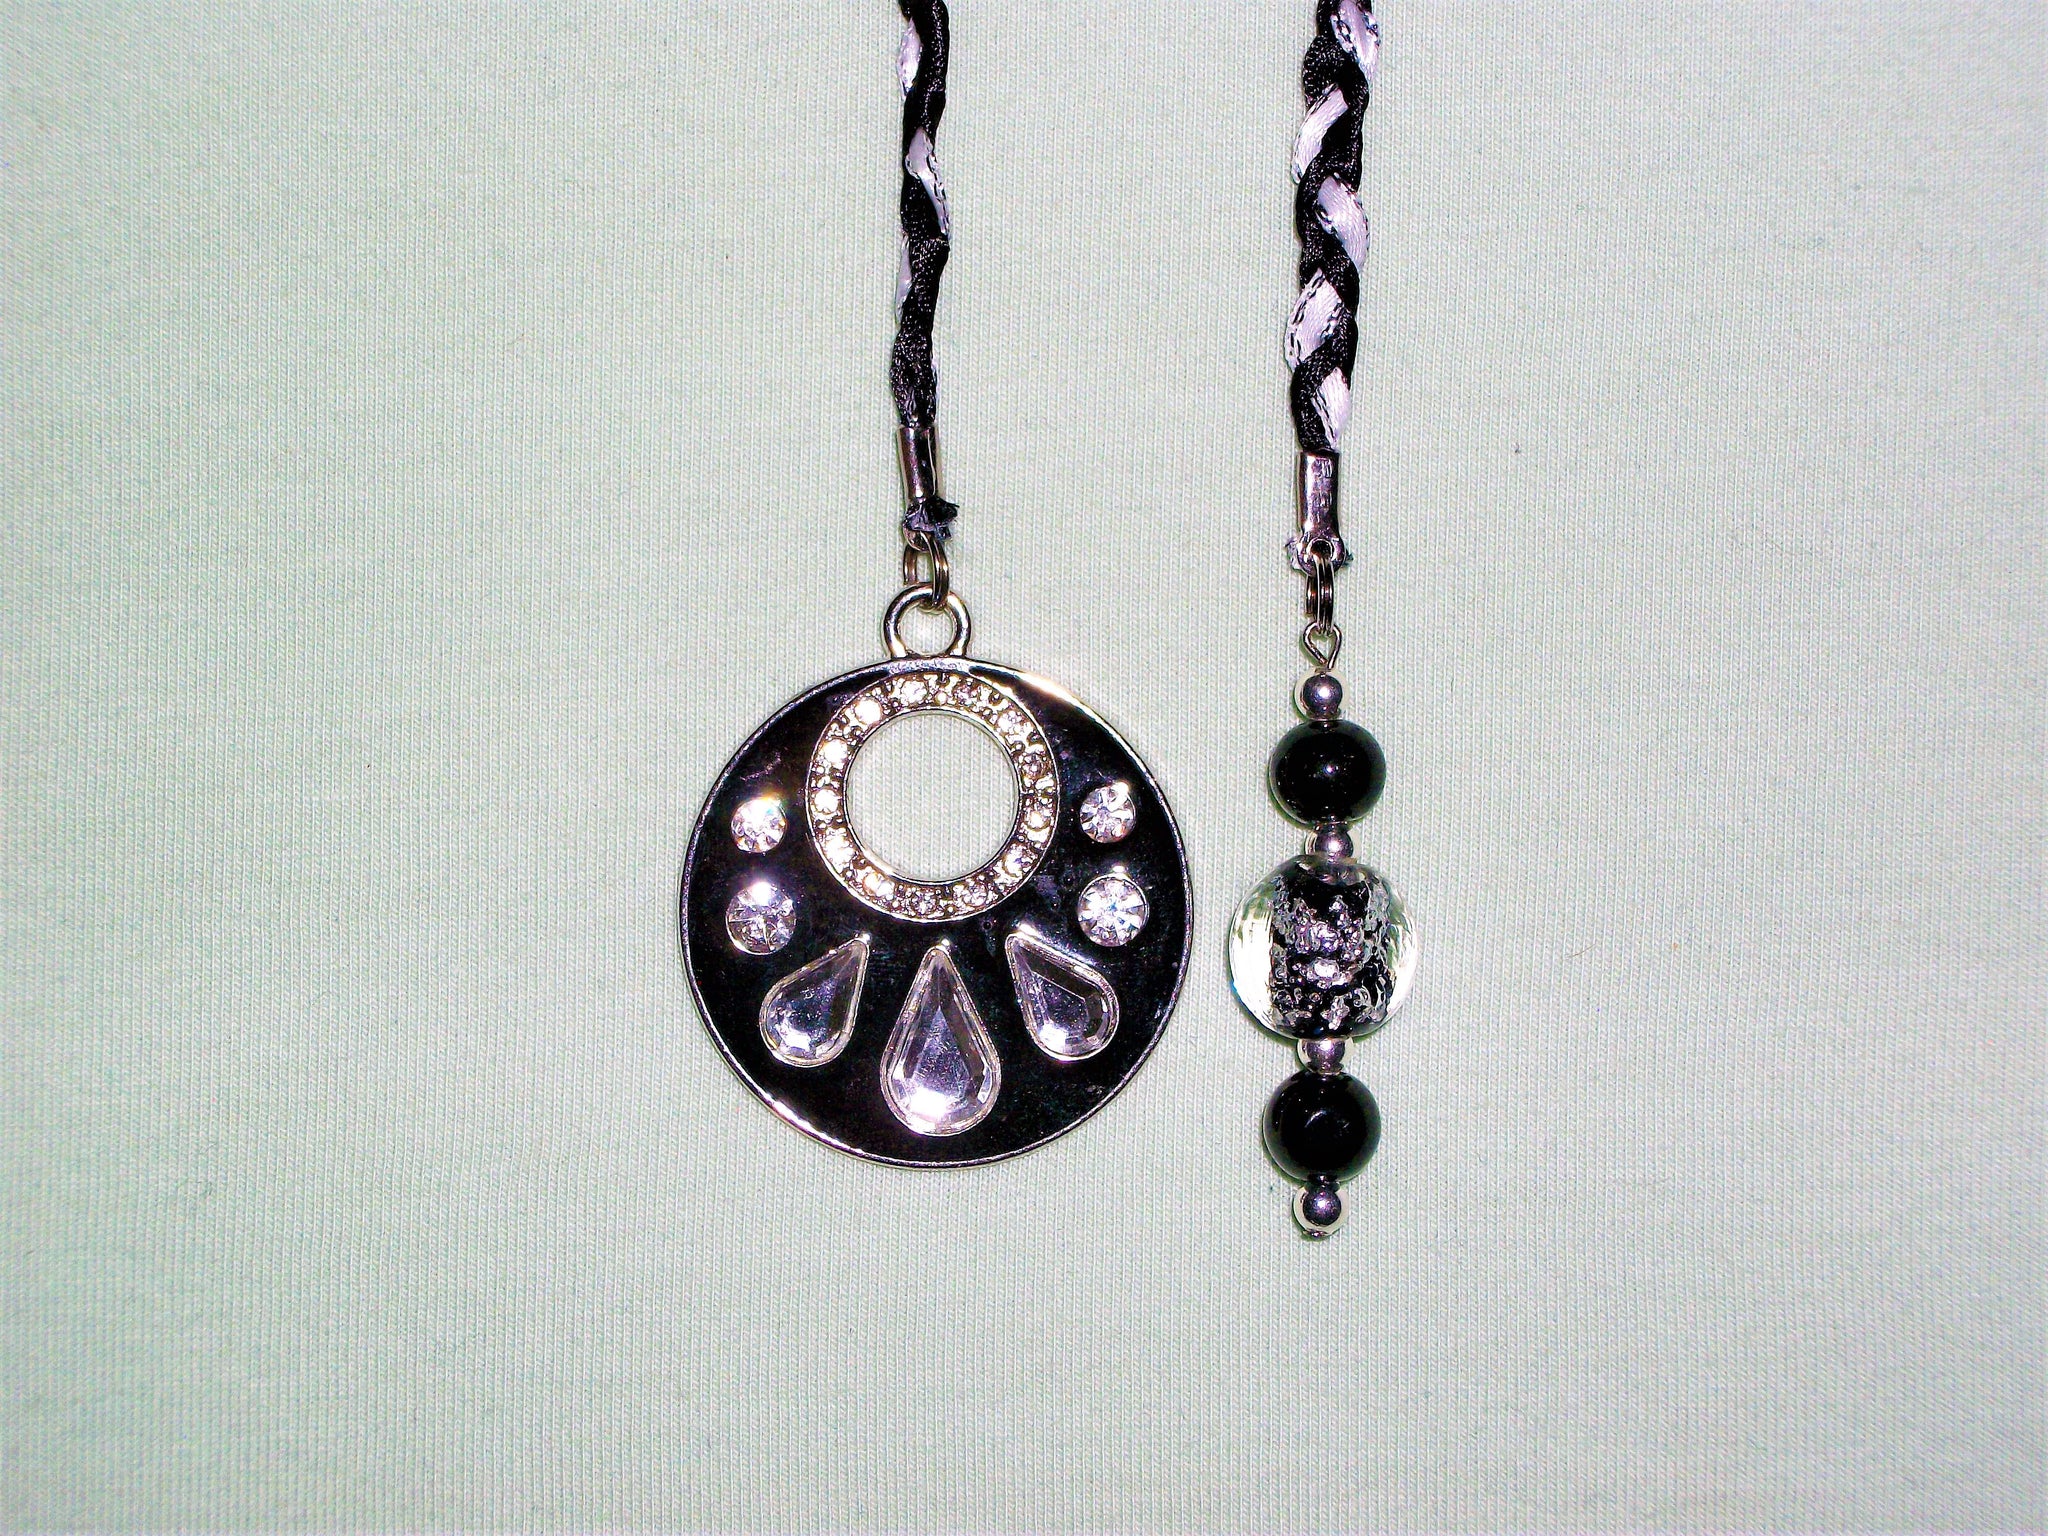 Black and white bookmark with black and silver beads and black pendant